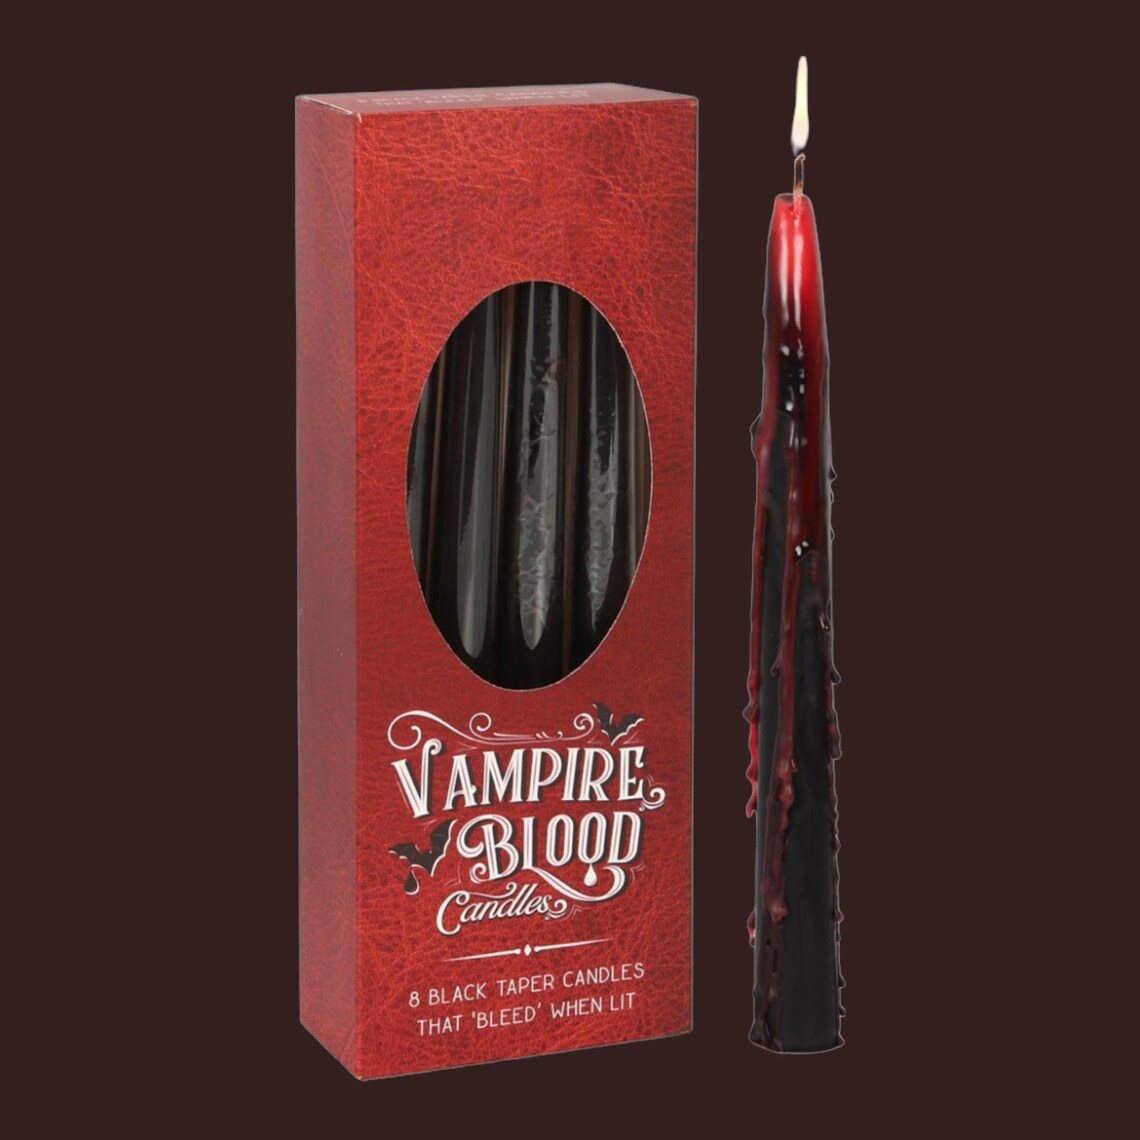 From candlelit dinners to eerie mood lighting, our Vampire Blood taper candles will entrance guests with their eye catching, bleeding wax effect.  Place these black and red candlesticks in an ornate candelabra for a truly bewitching display when the warm wax bleeds down its sides.  Sold in boxes of 8. Approximately 2 hour burn time per candle.  Size: H: 25.5cm x W: 9cm x D: 4.5cm